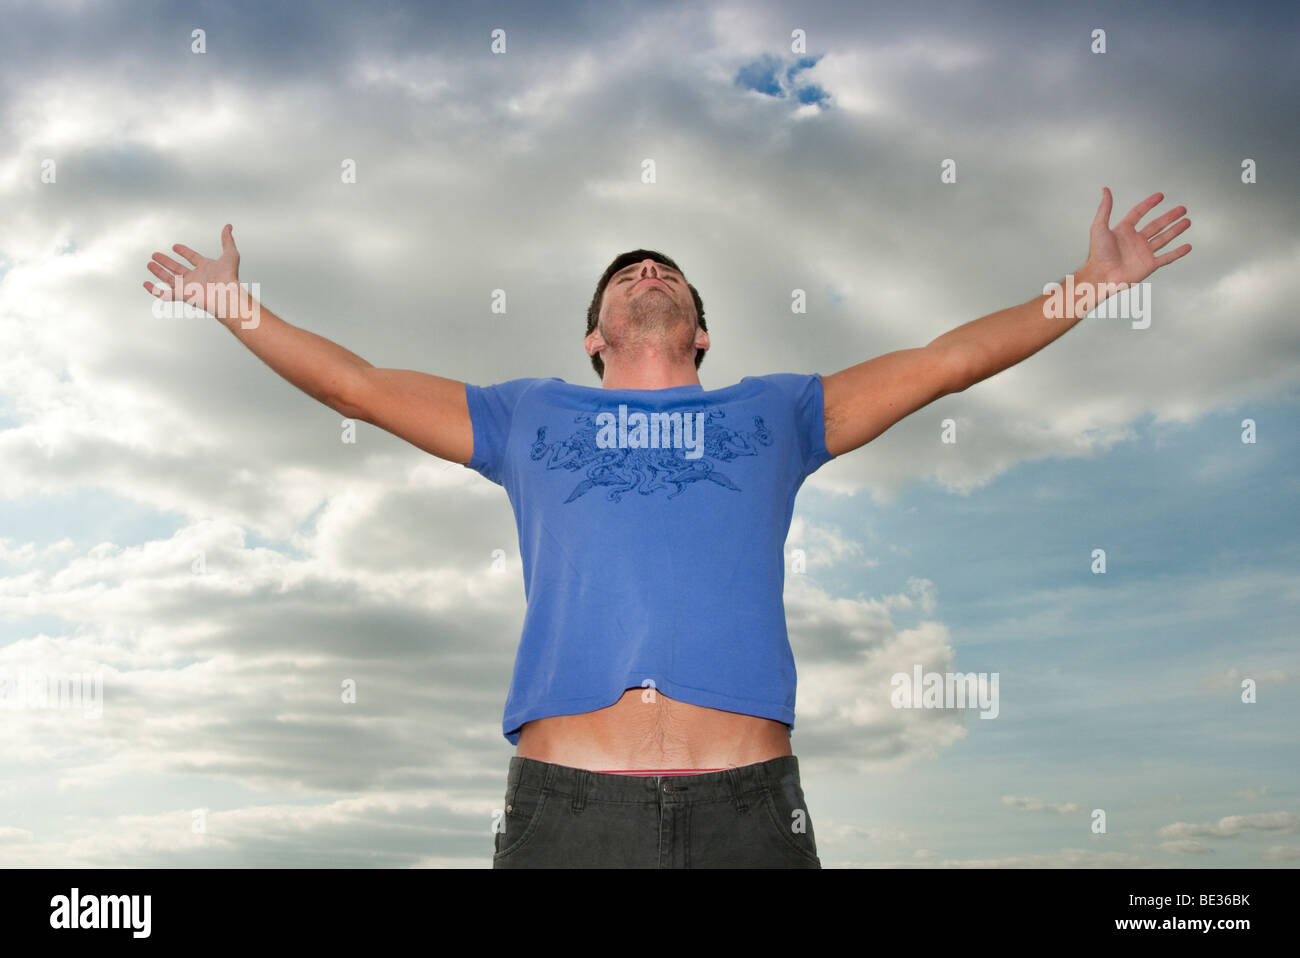 Classic Figure Of Human Being With Arms Stretched Out Stock Photo, Picture  and Royalty Free Image. Image 30870189.